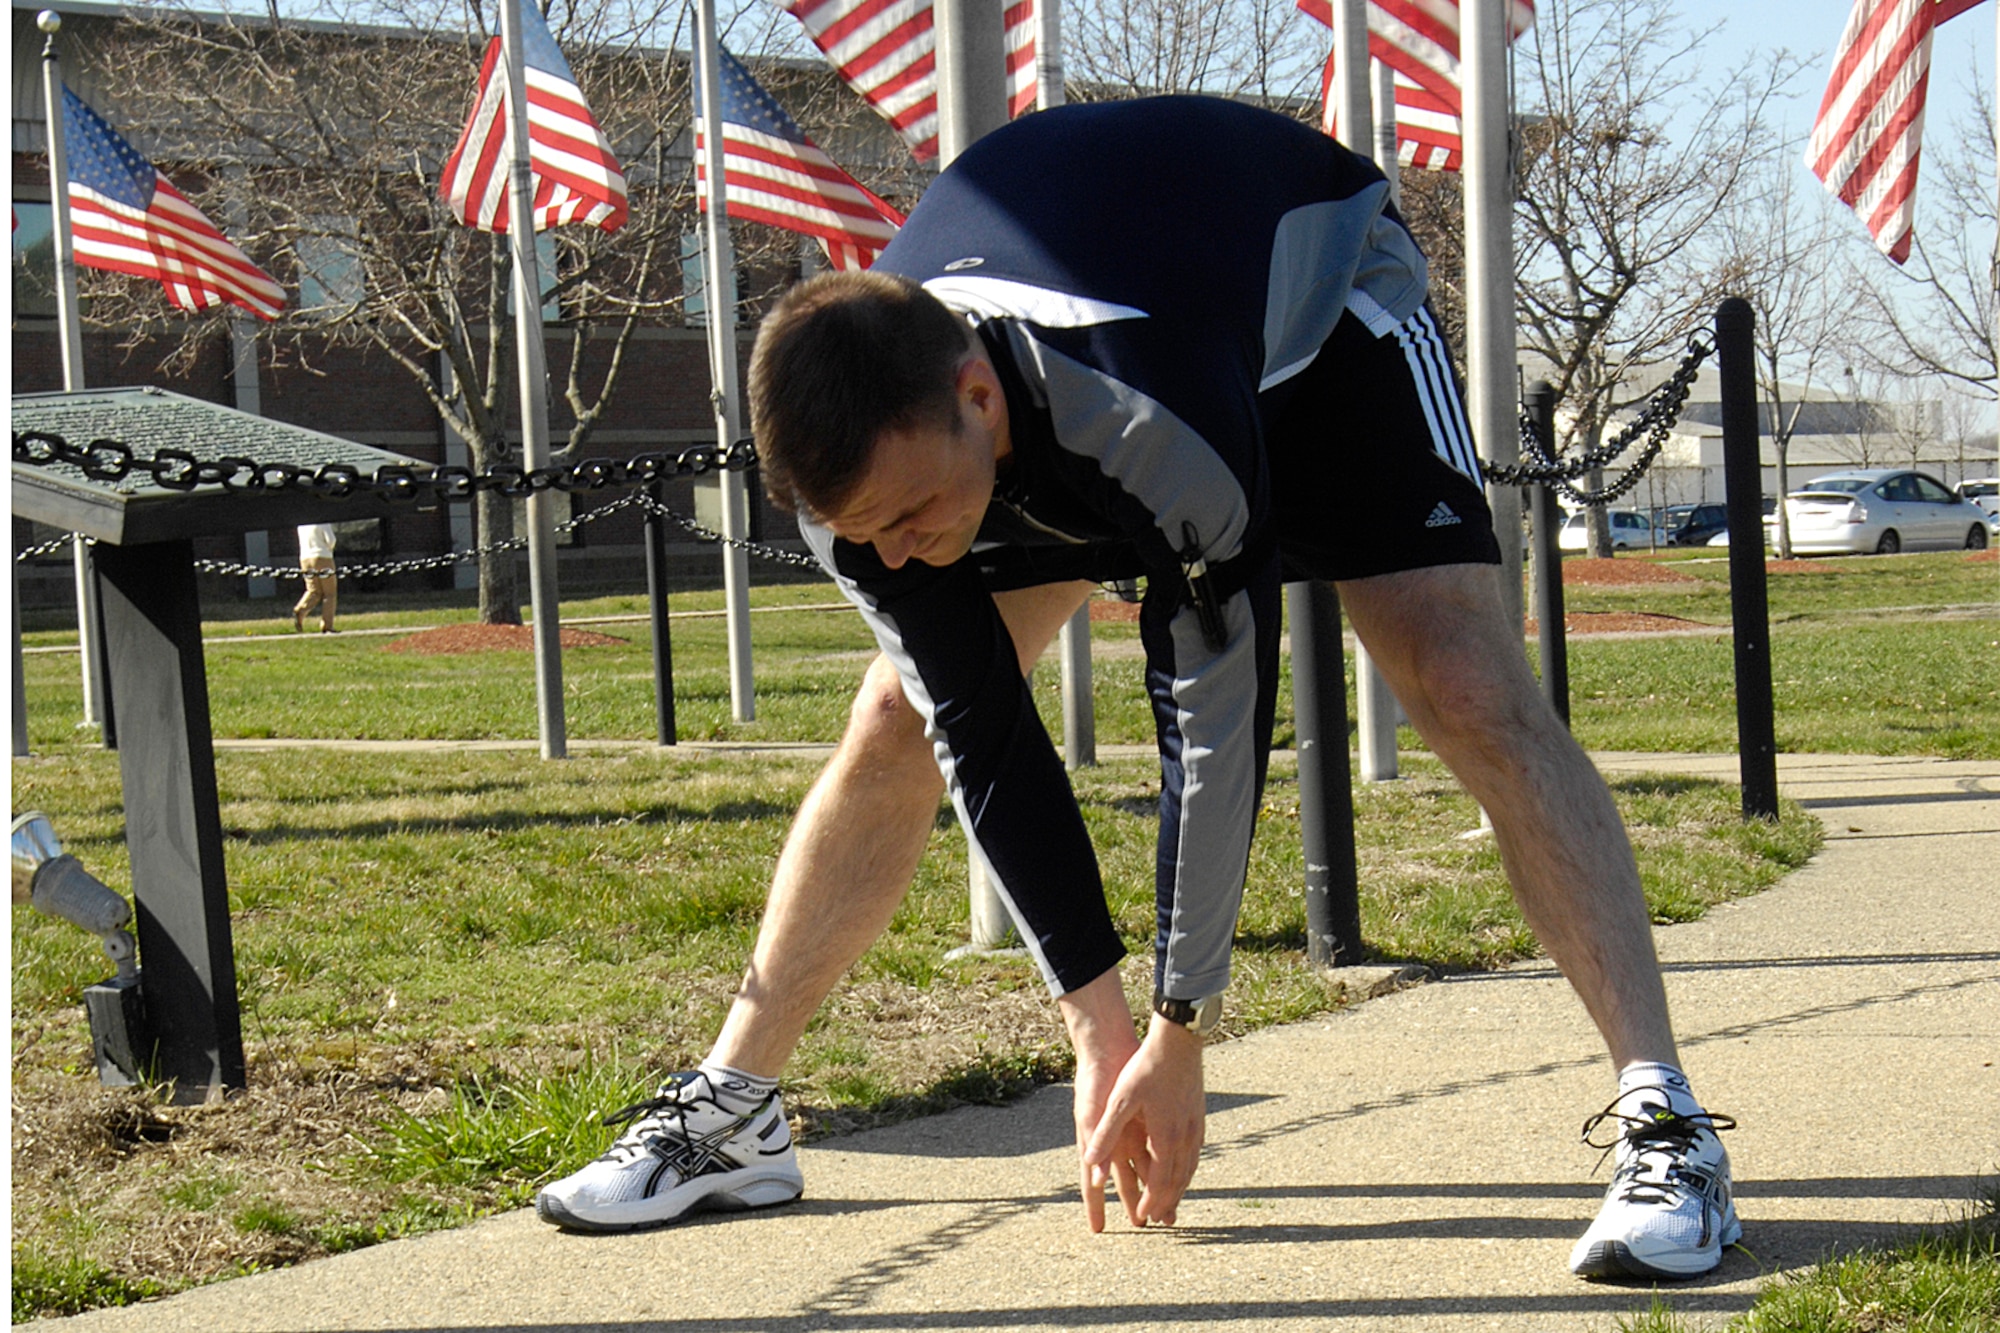 HANSCOM AFB, Mass. – Capt. Brad Panton, Program Manager for the Enhanced Regional Situation Awareness Program here, stretches out before a short run April 17th in preparation for the upcoming Boston Marathon. Capt. Panton ran the marathon with his two siblings, Army Capt. Jeannie Deakyne and Navy Lt. Davie Panton. (U.S. Air Force photo by Linda LaBonte Britt.)